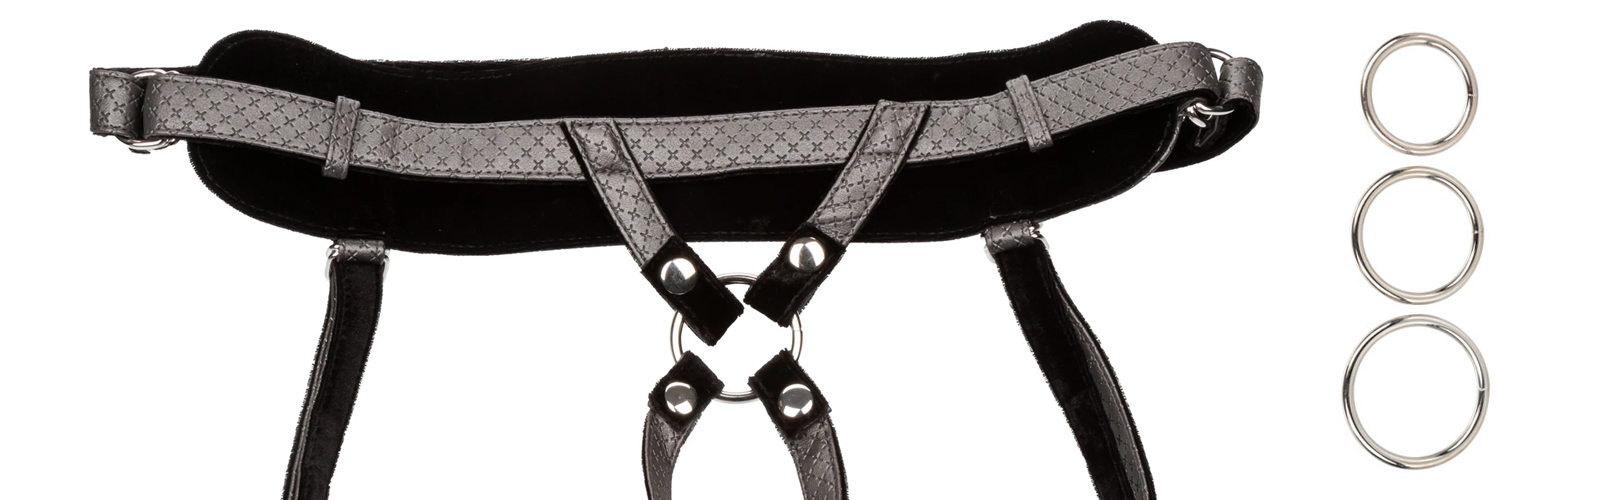 Harness with o-rings